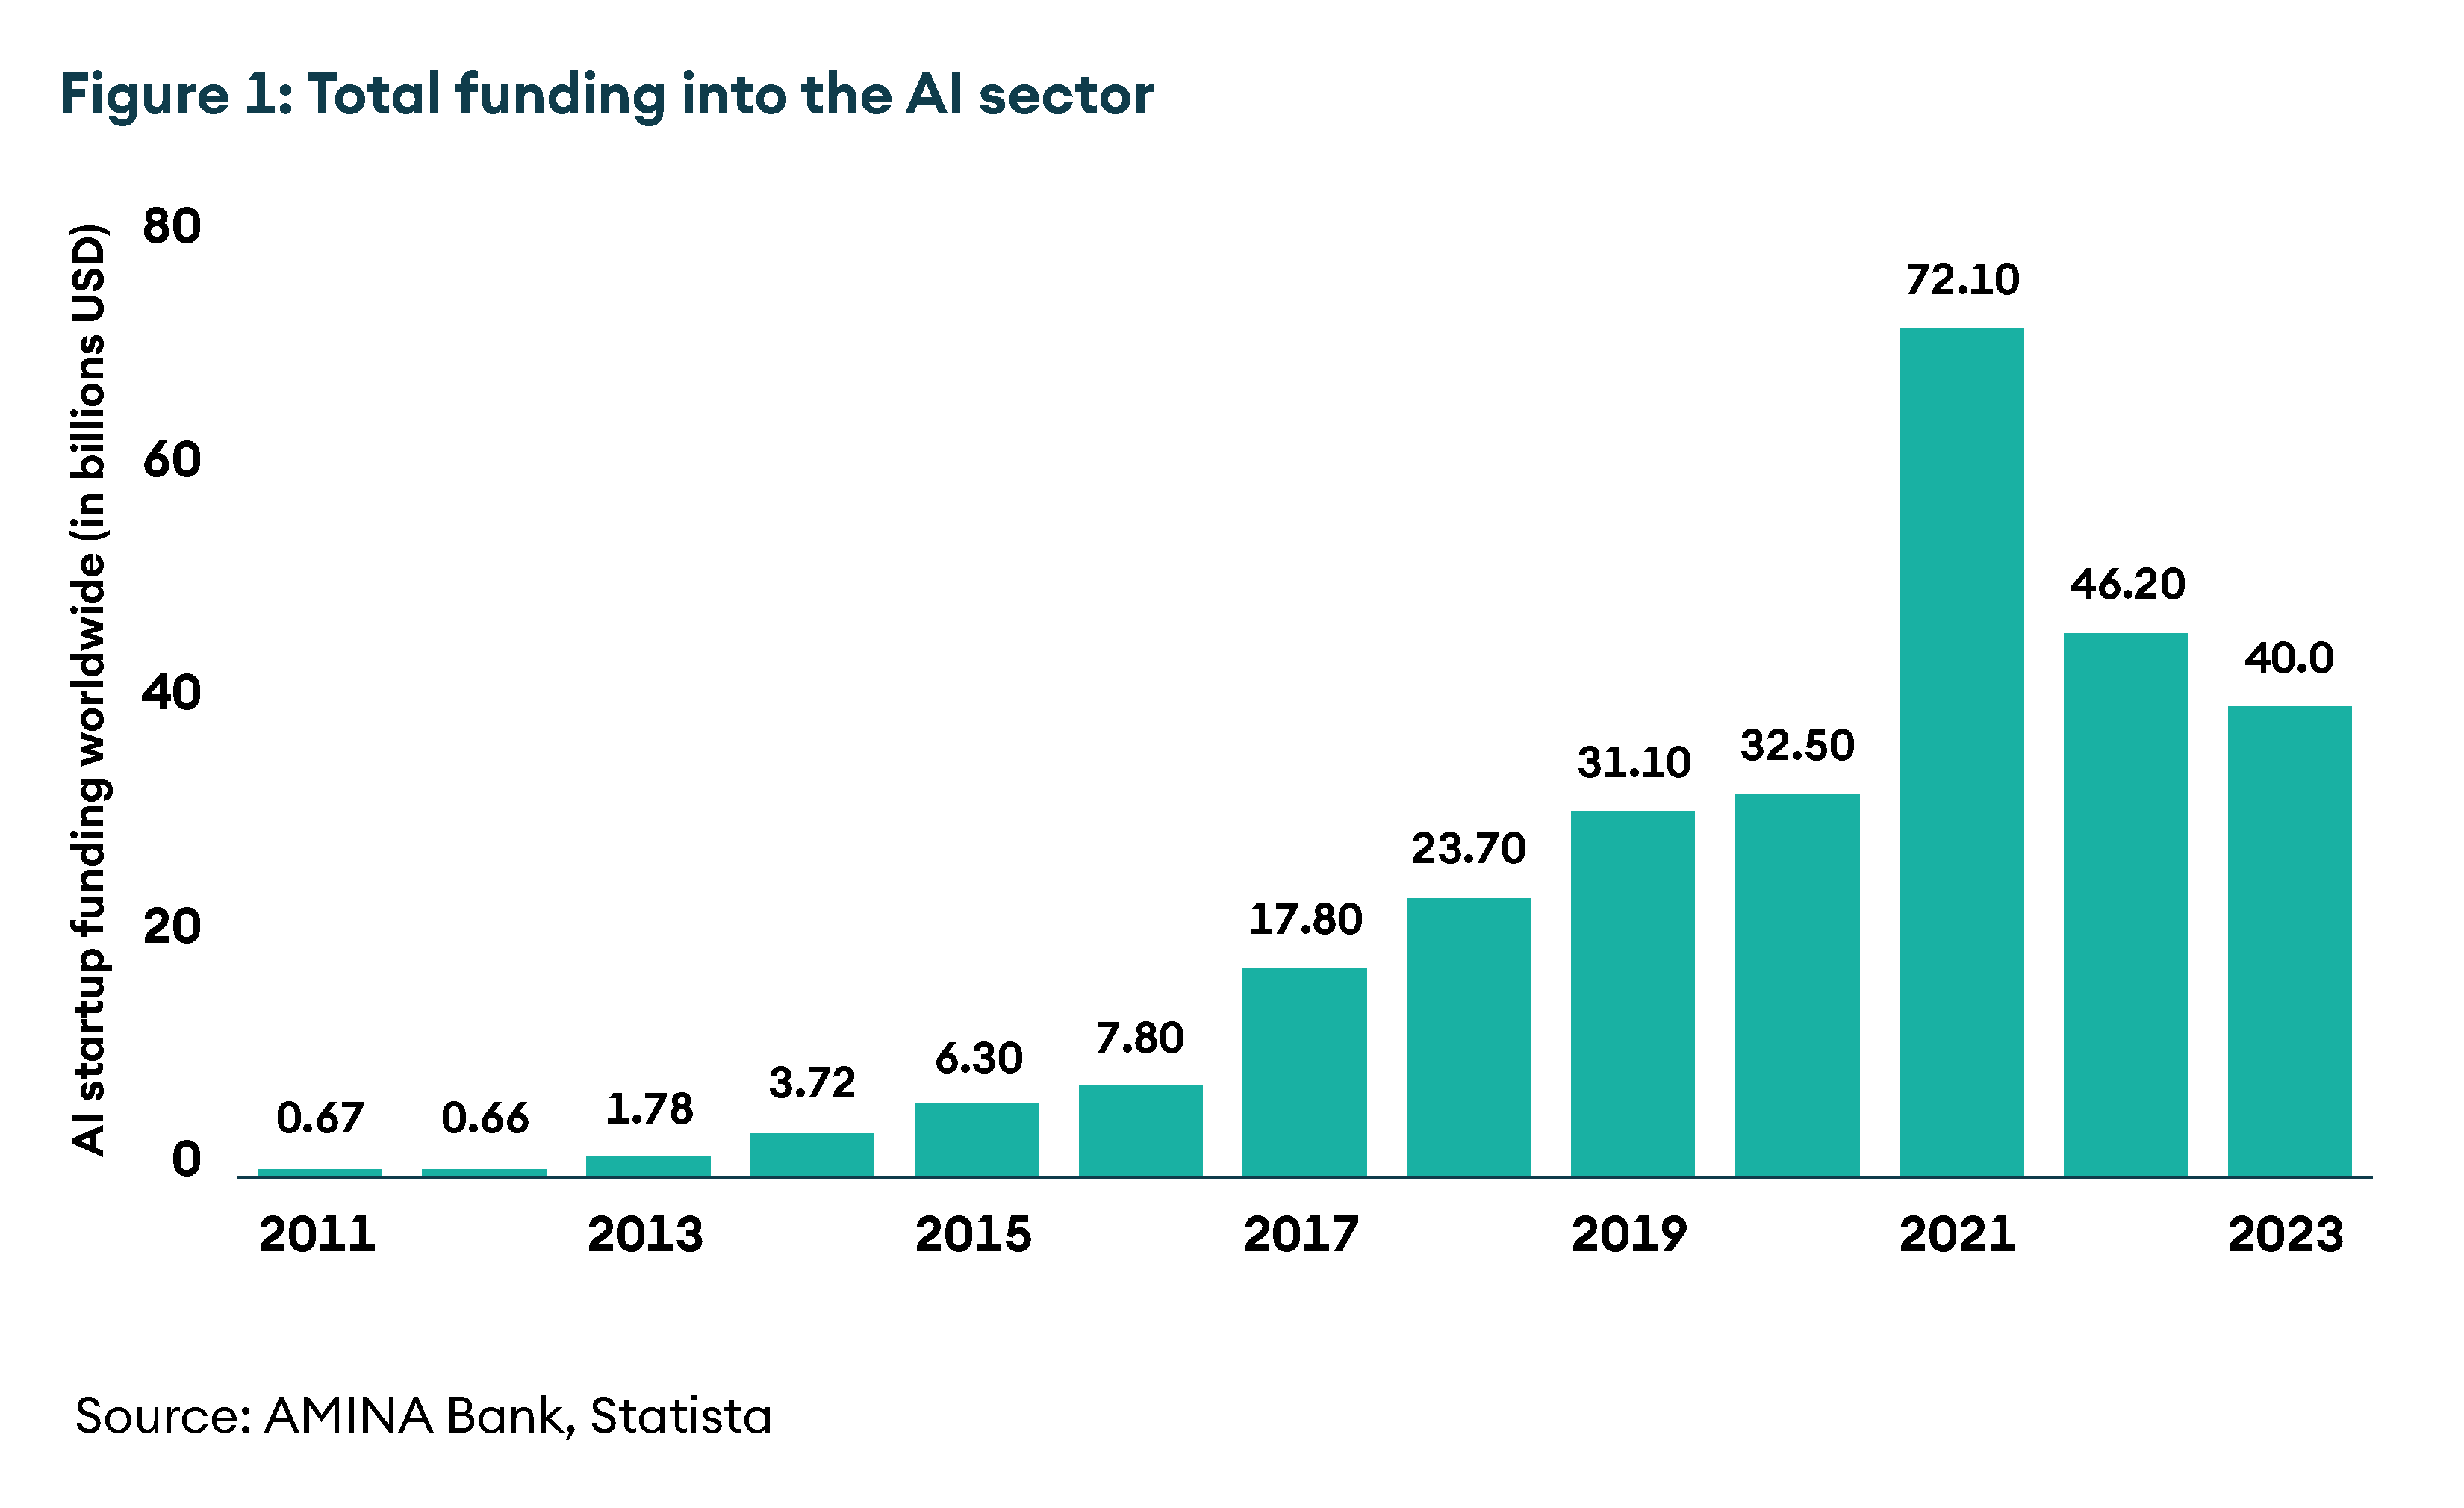 Total funding into the AI sector